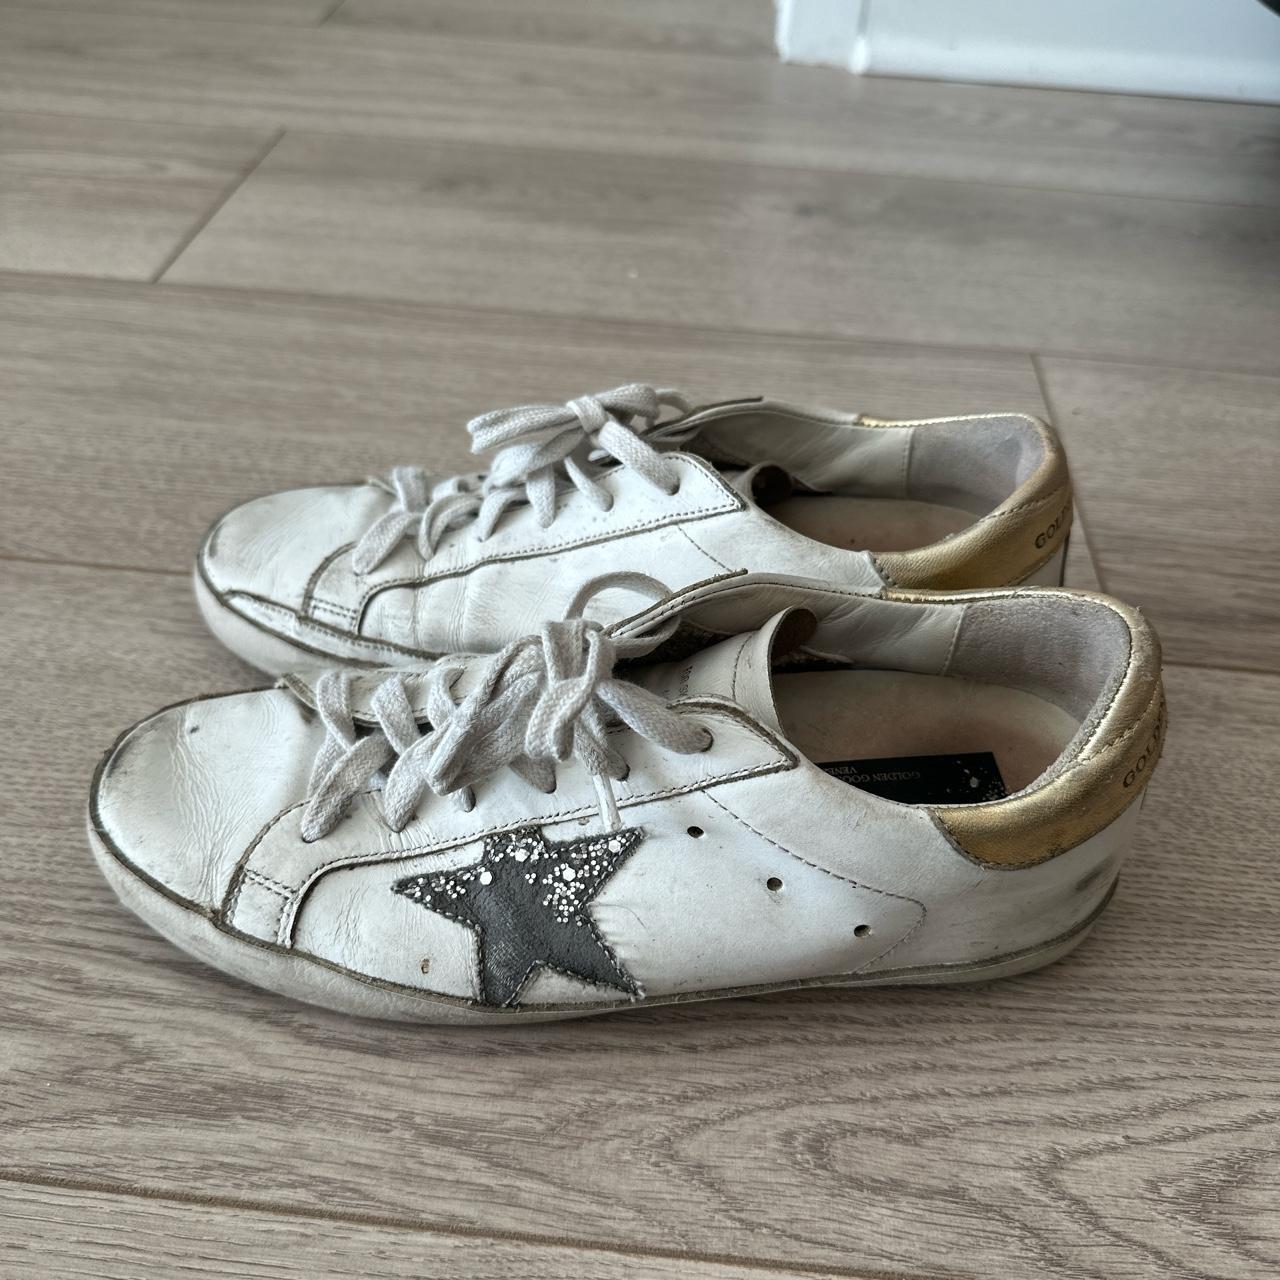 Golden Goose Women's White and Cream Trainers